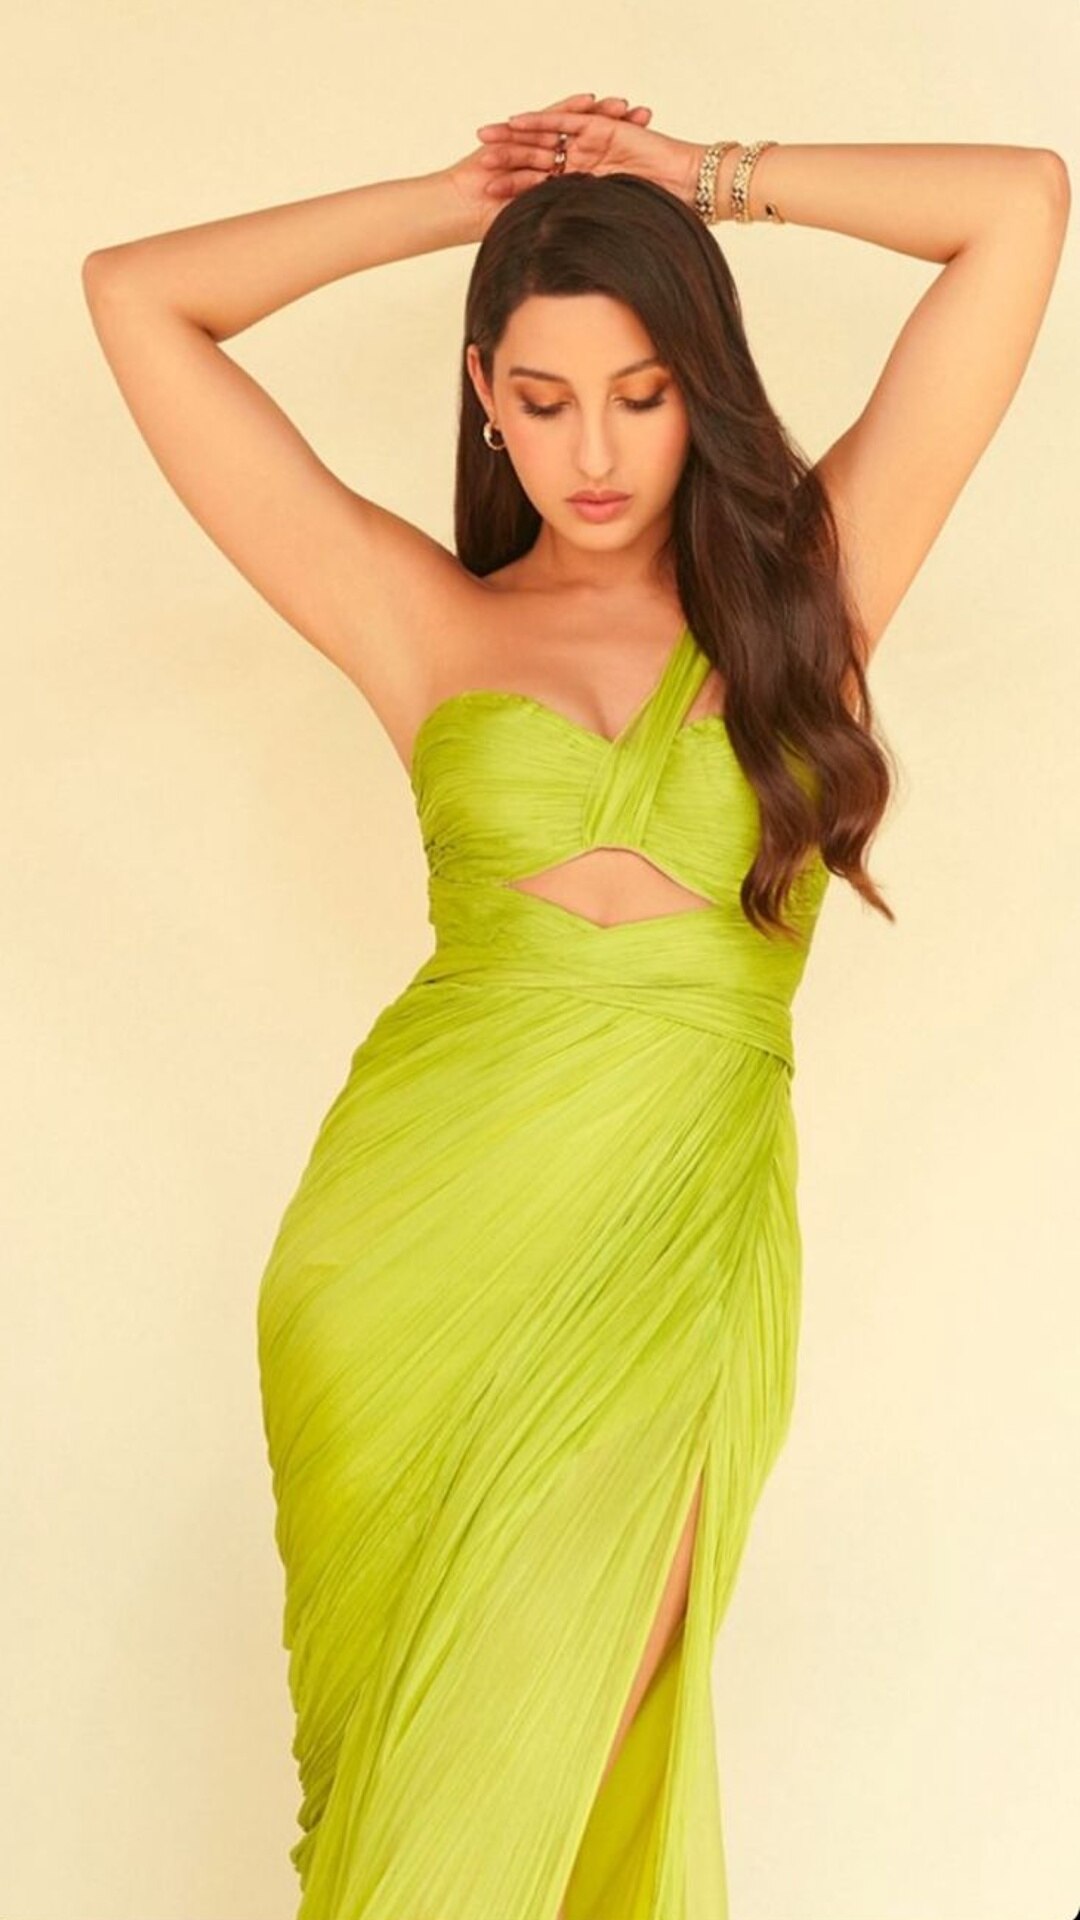 Nora Fatehi Adds Glitz And Glamour In A Shimmery Green Dress